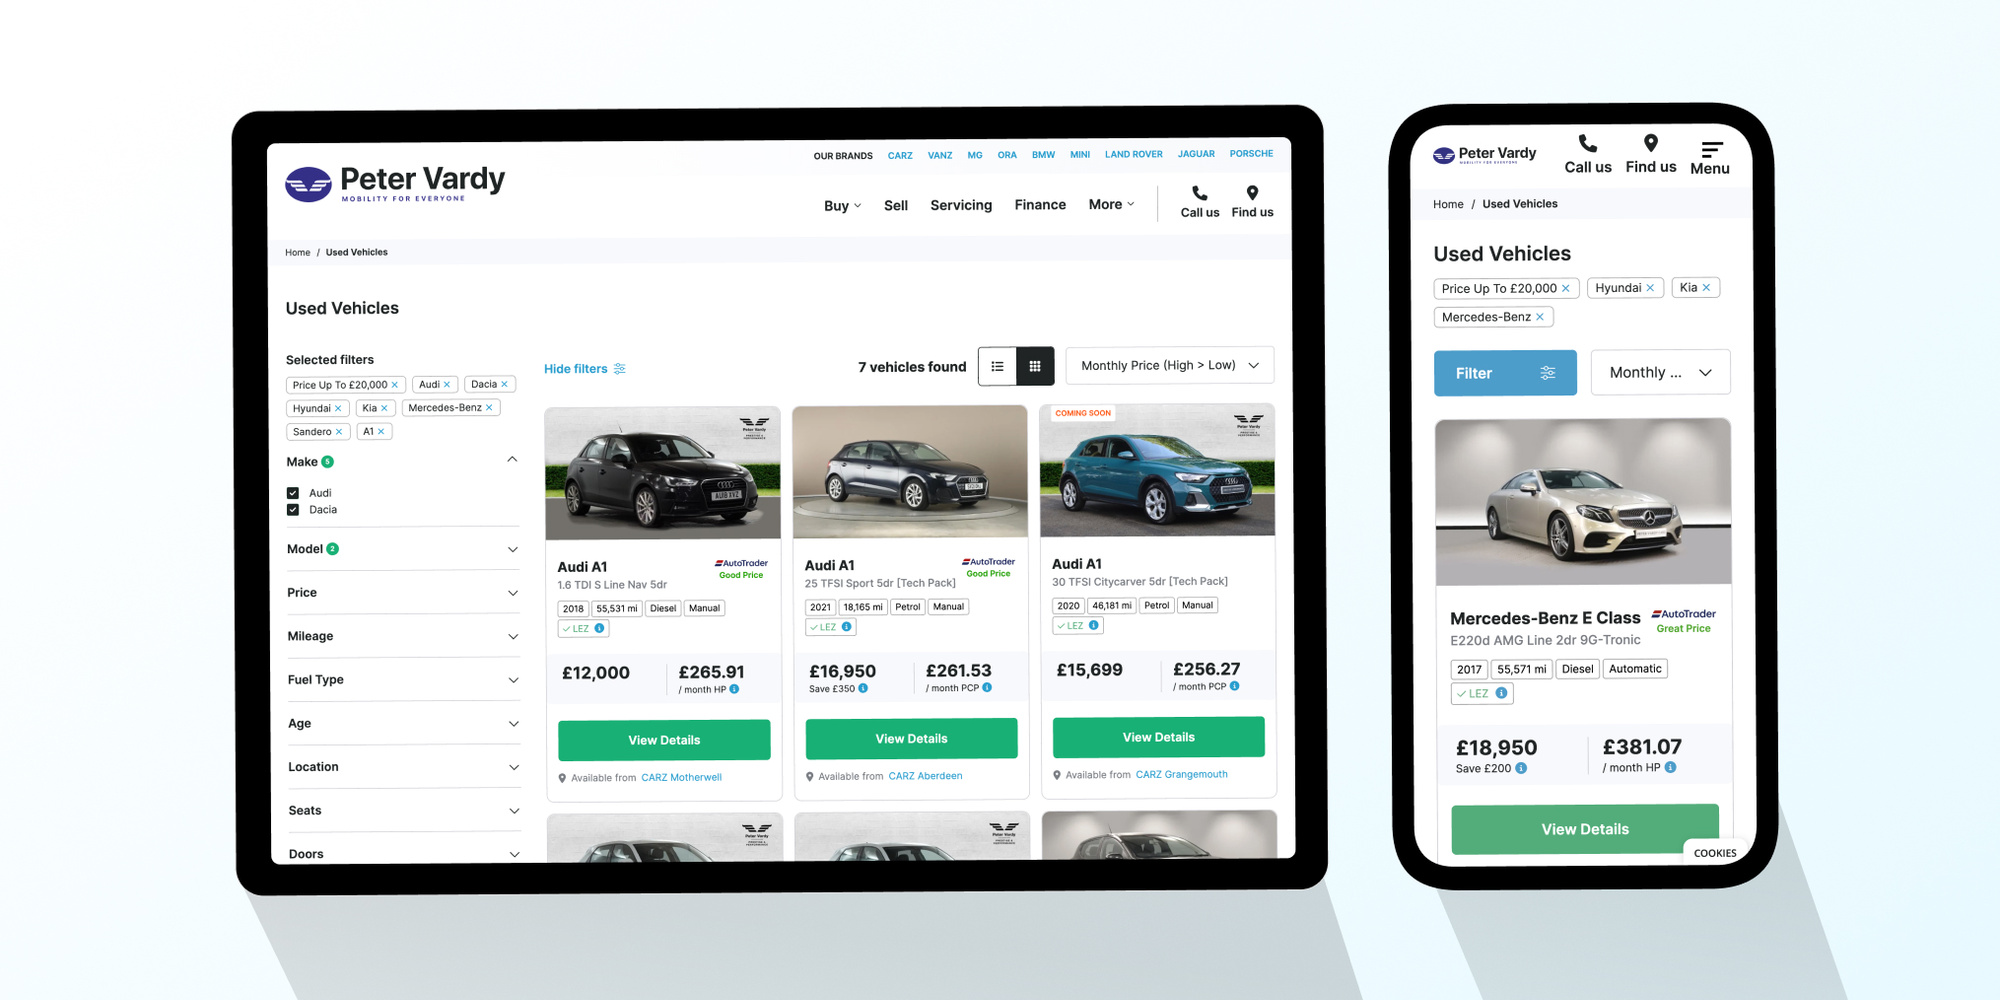 Browsing cars has never been so easy with everything you need upfront and clear pricing / finance offers Image